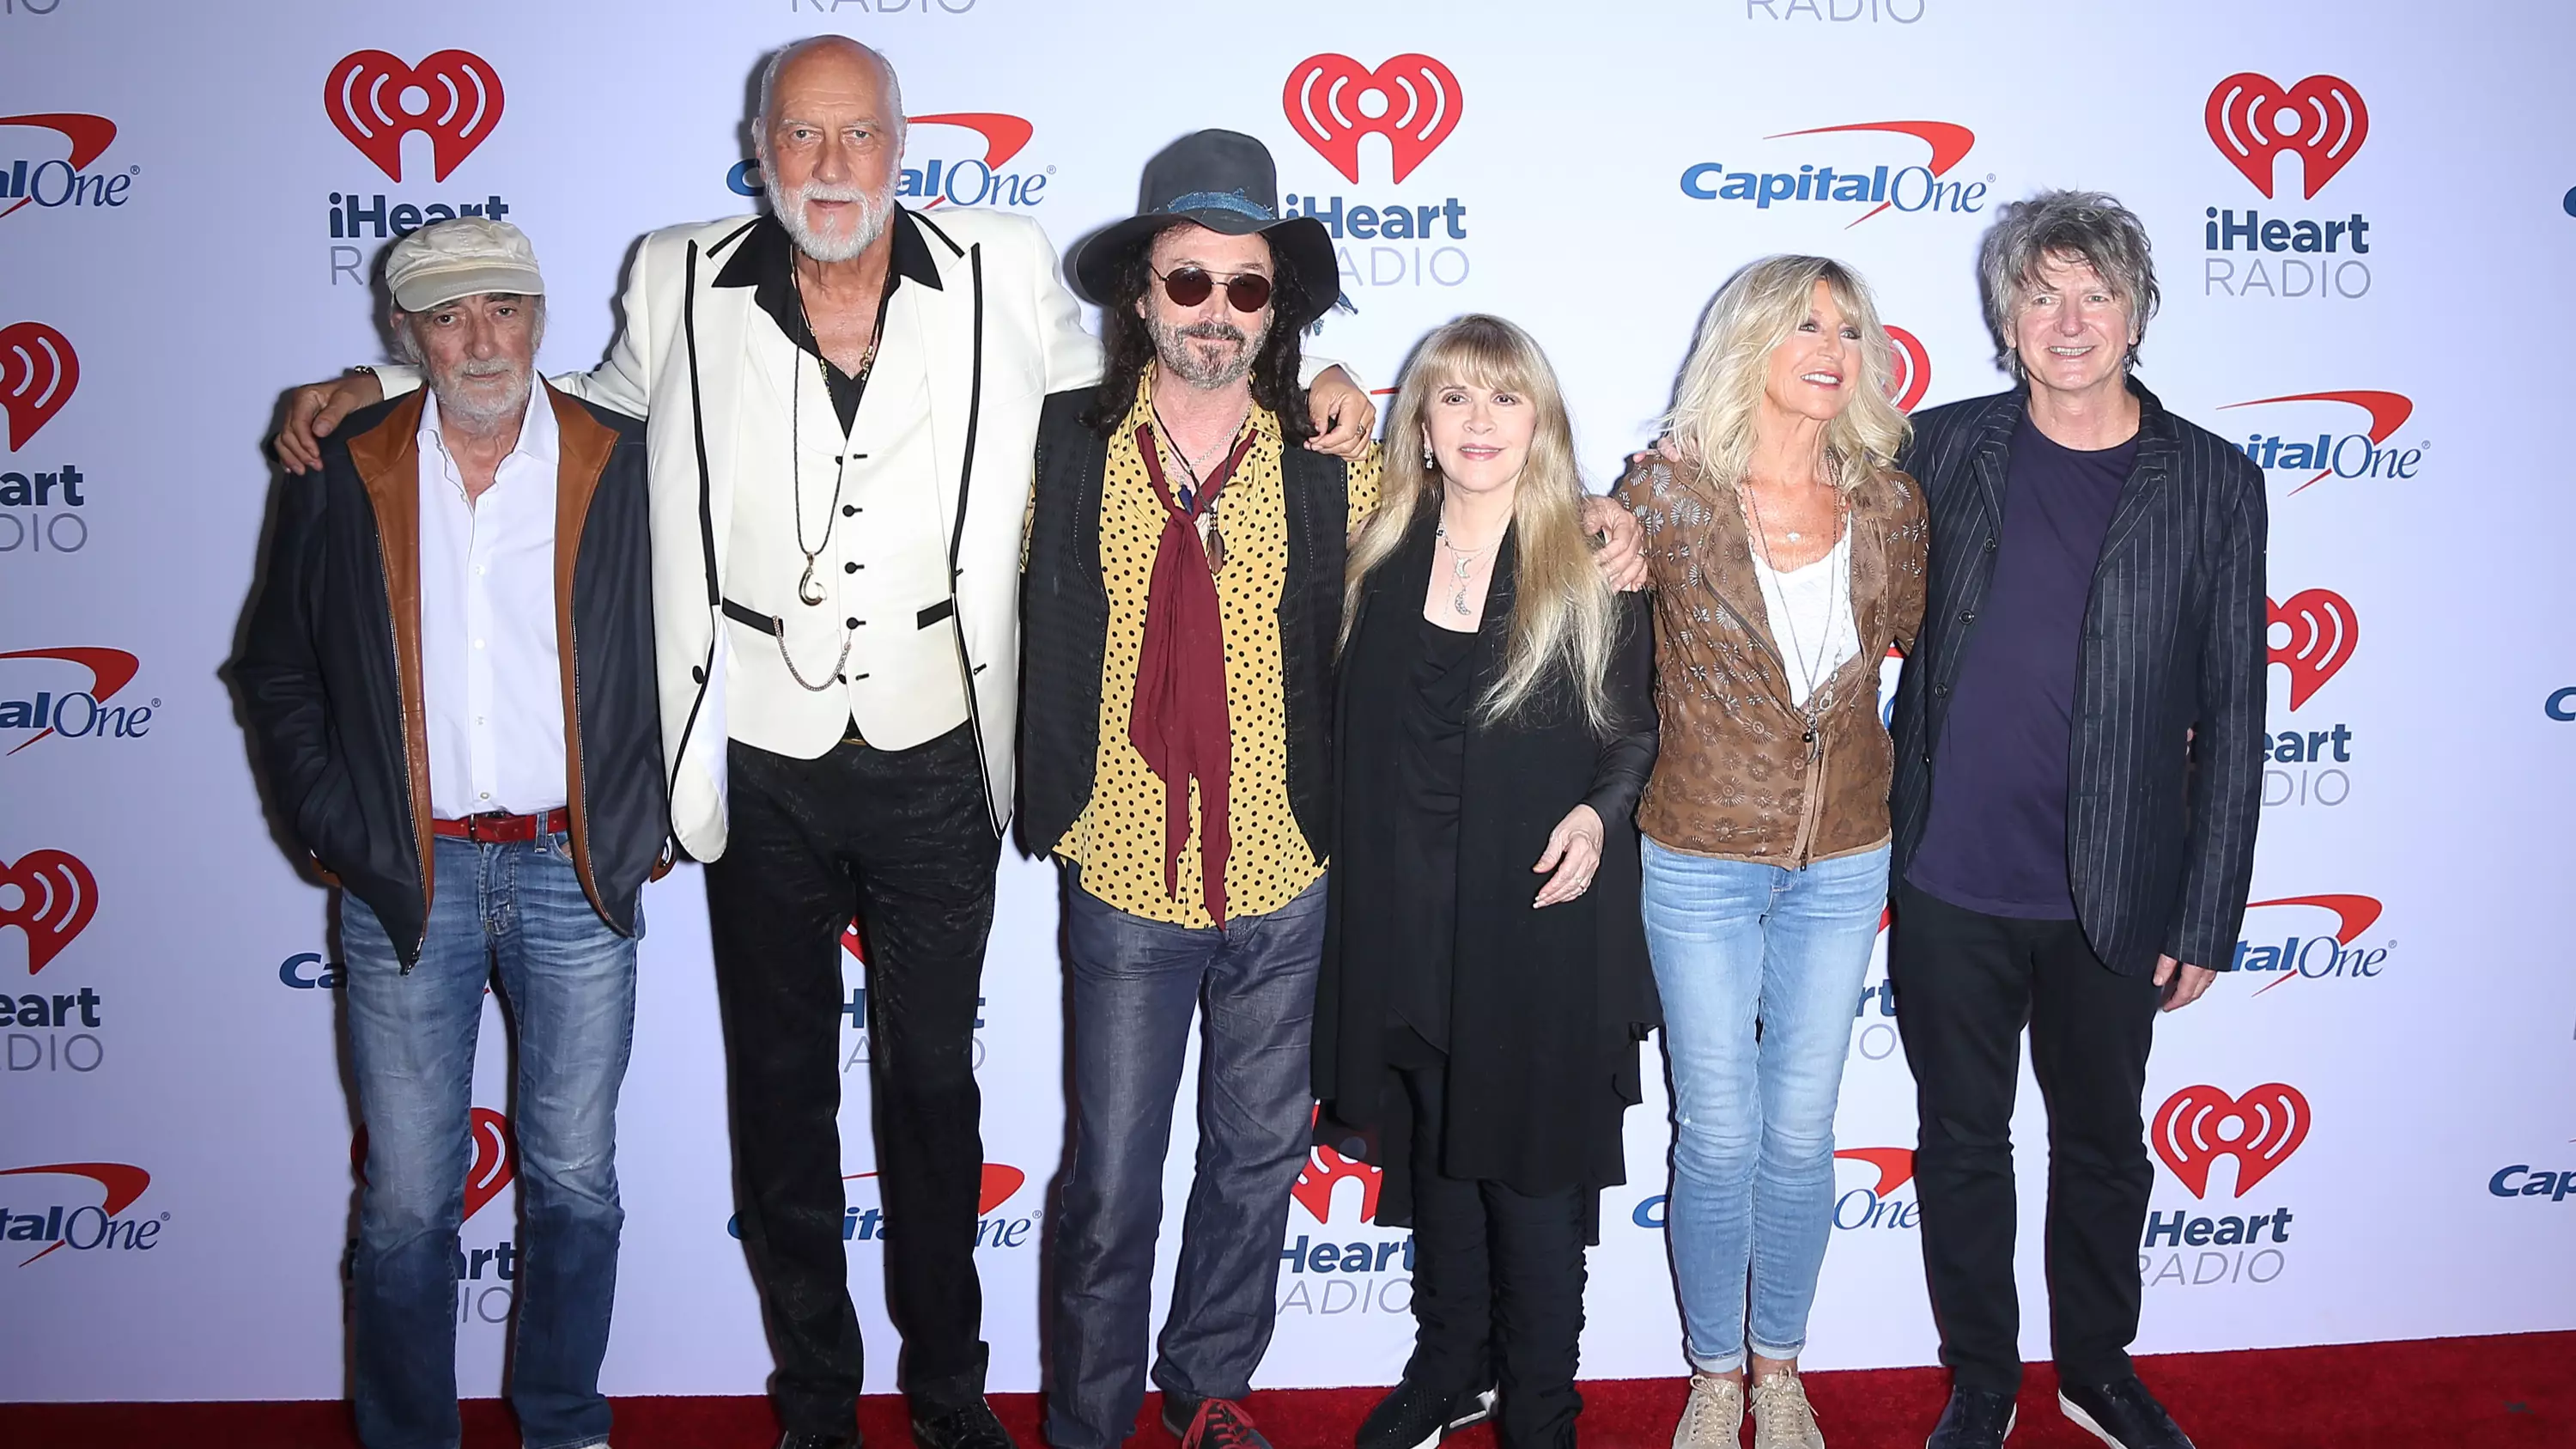 Fleetwood Mac 2019 Tour: Tickets, Prices And Presale Dates